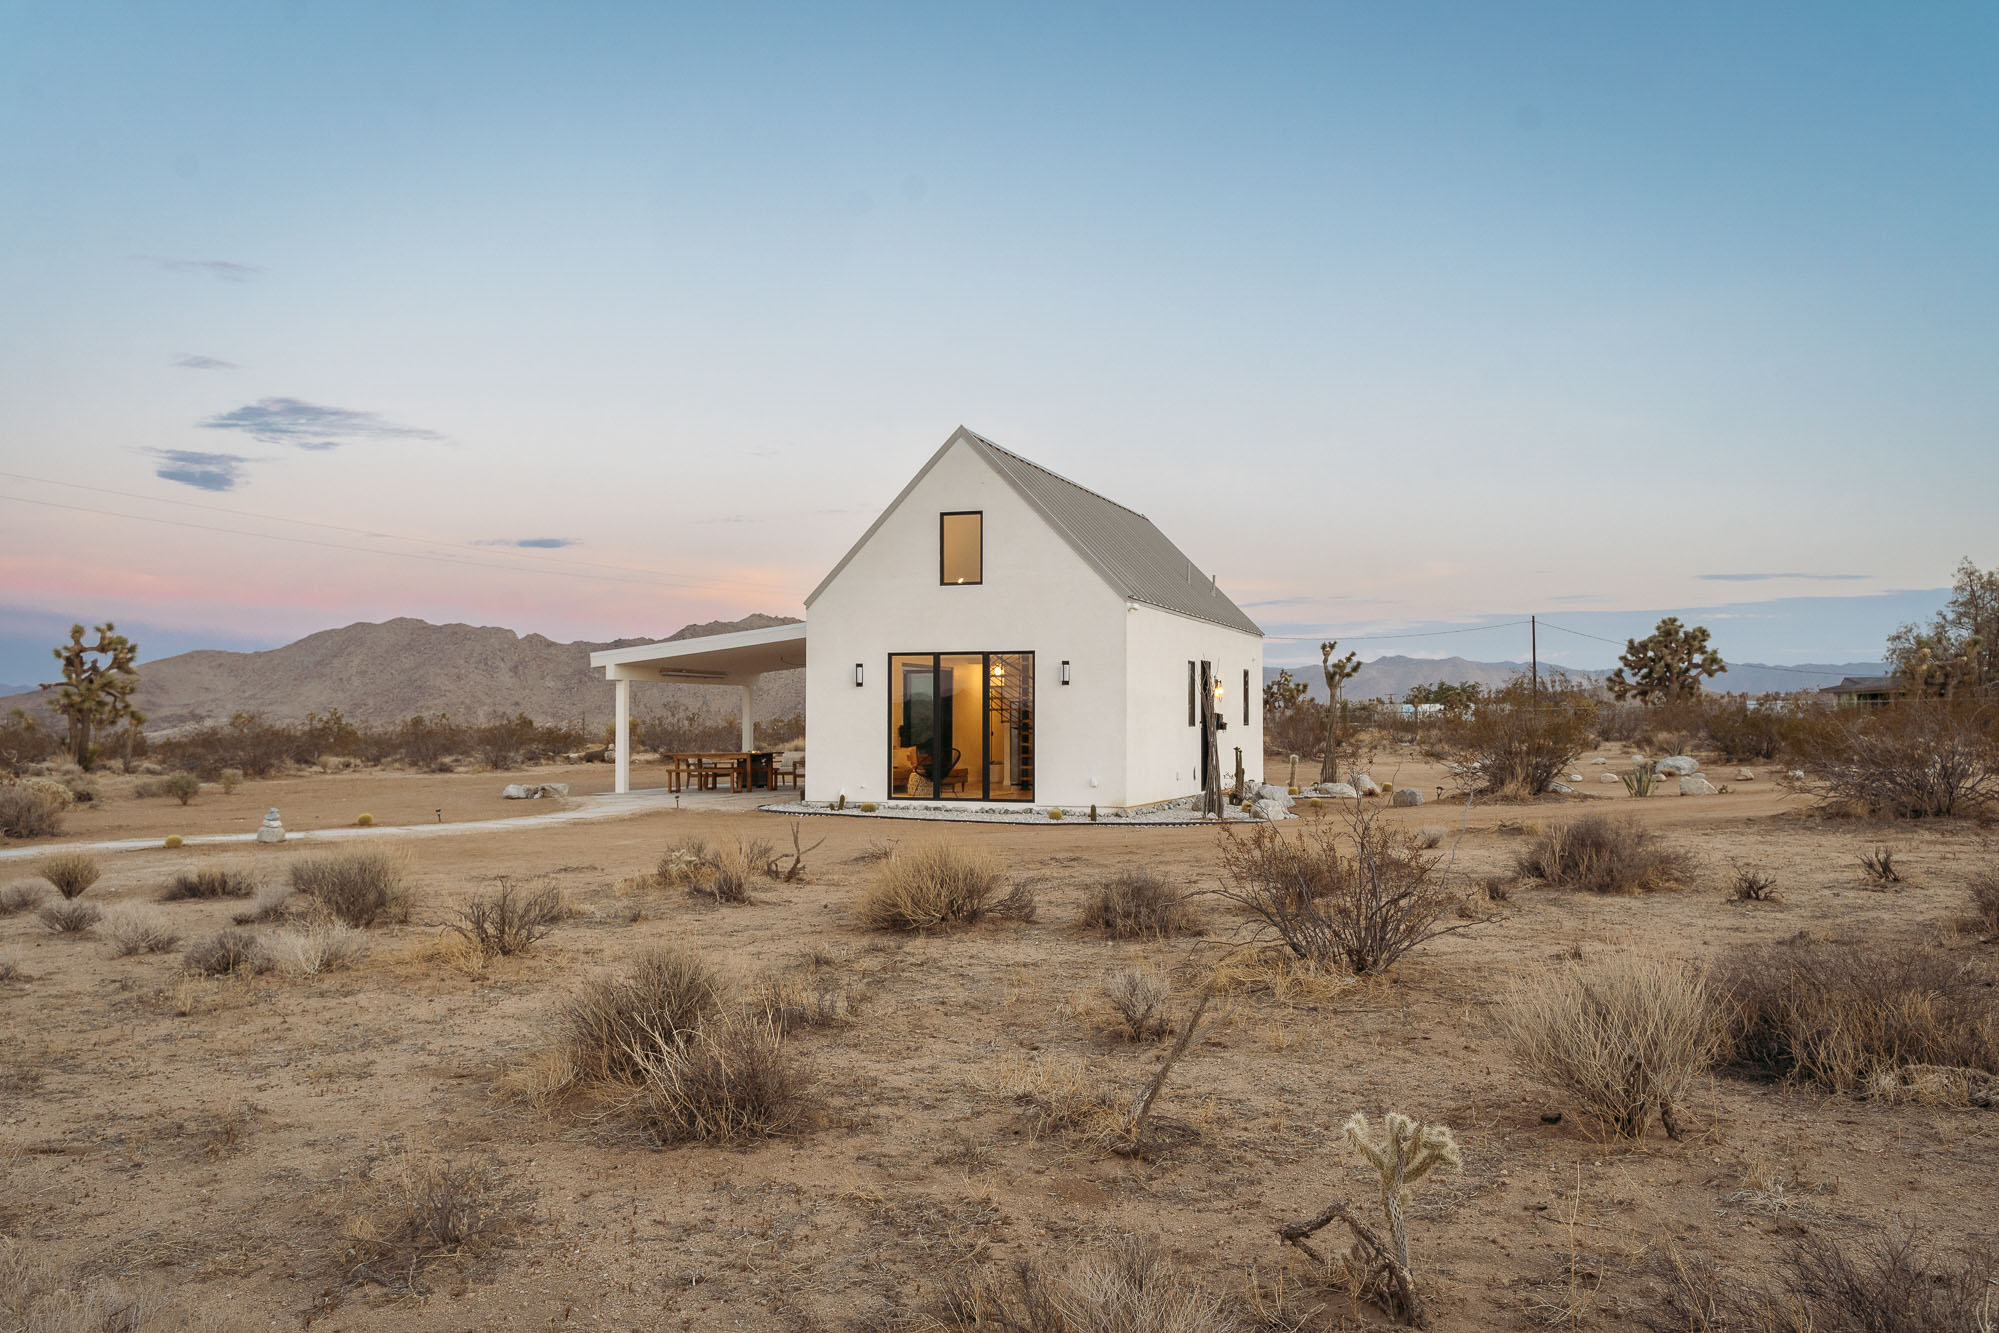 White house with overhang porch in a desert landscape.